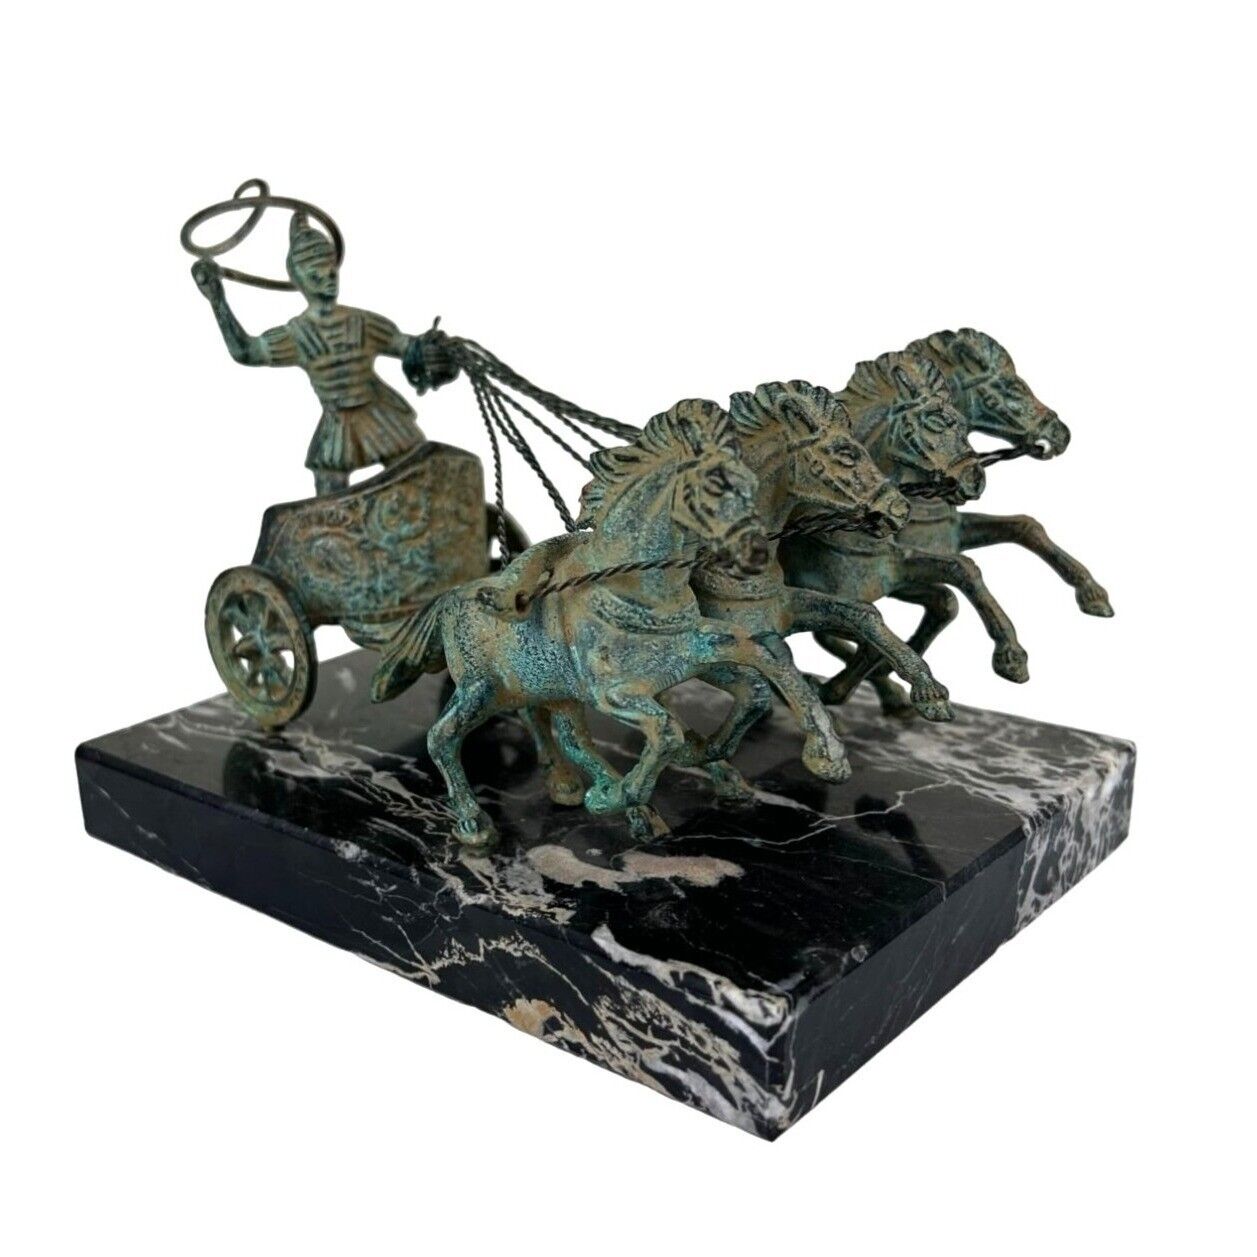 Vintage De Benedicts Imports Italy Metal Chariot Rider Horses Marble Base Statue